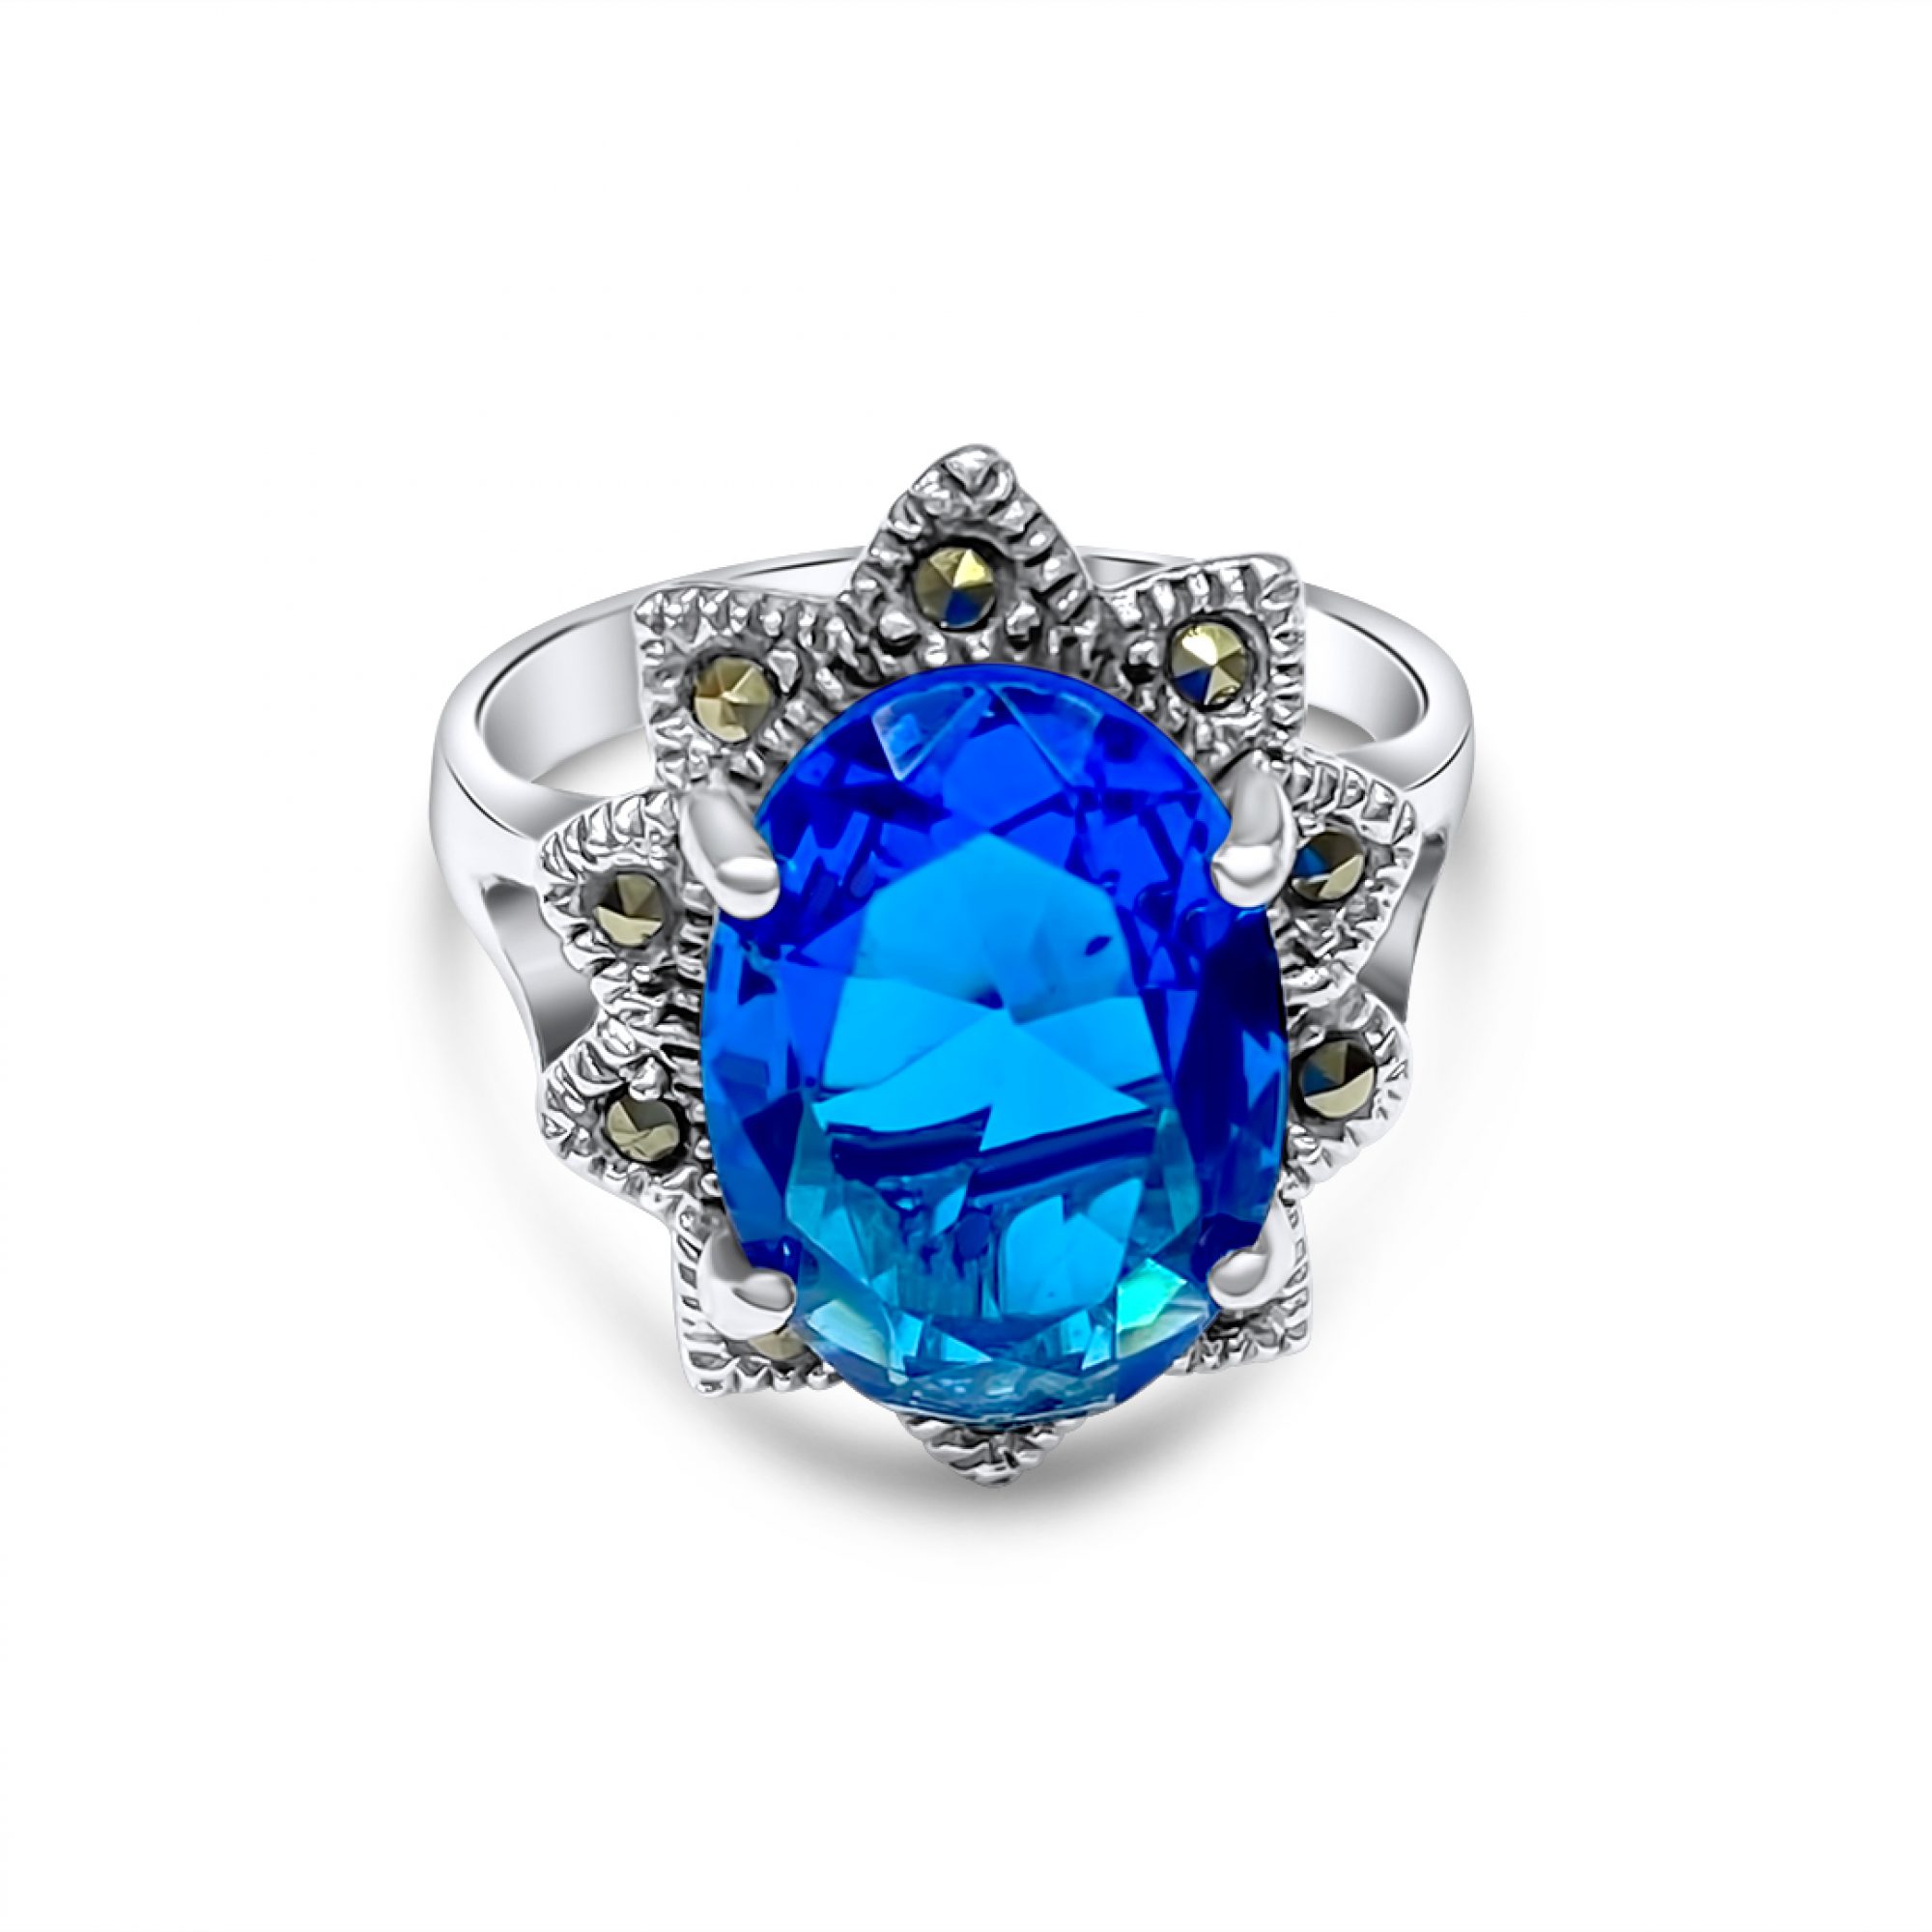 Ring with sapphire stone and marcasites